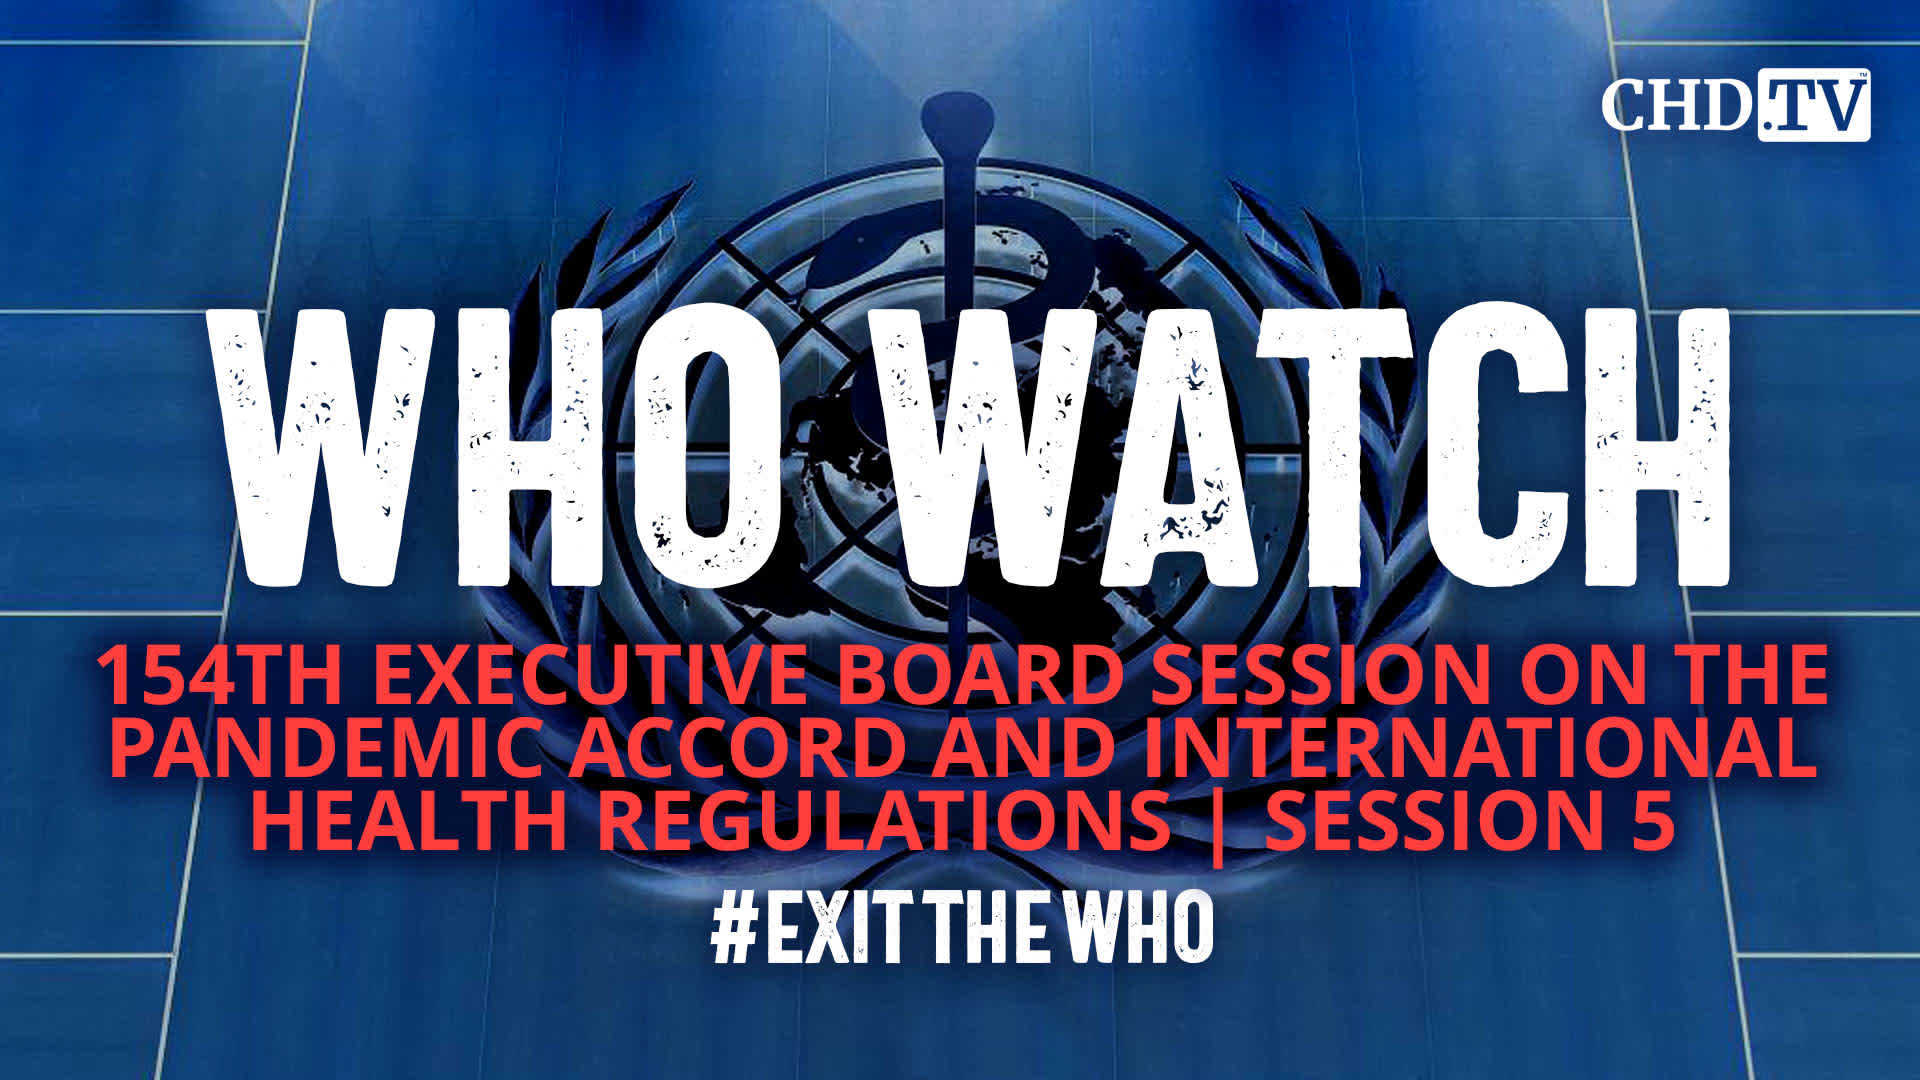 WHO WATCH: 154th Executive Board Session on the Pandemic Accord and International Health Regulations | Session 5